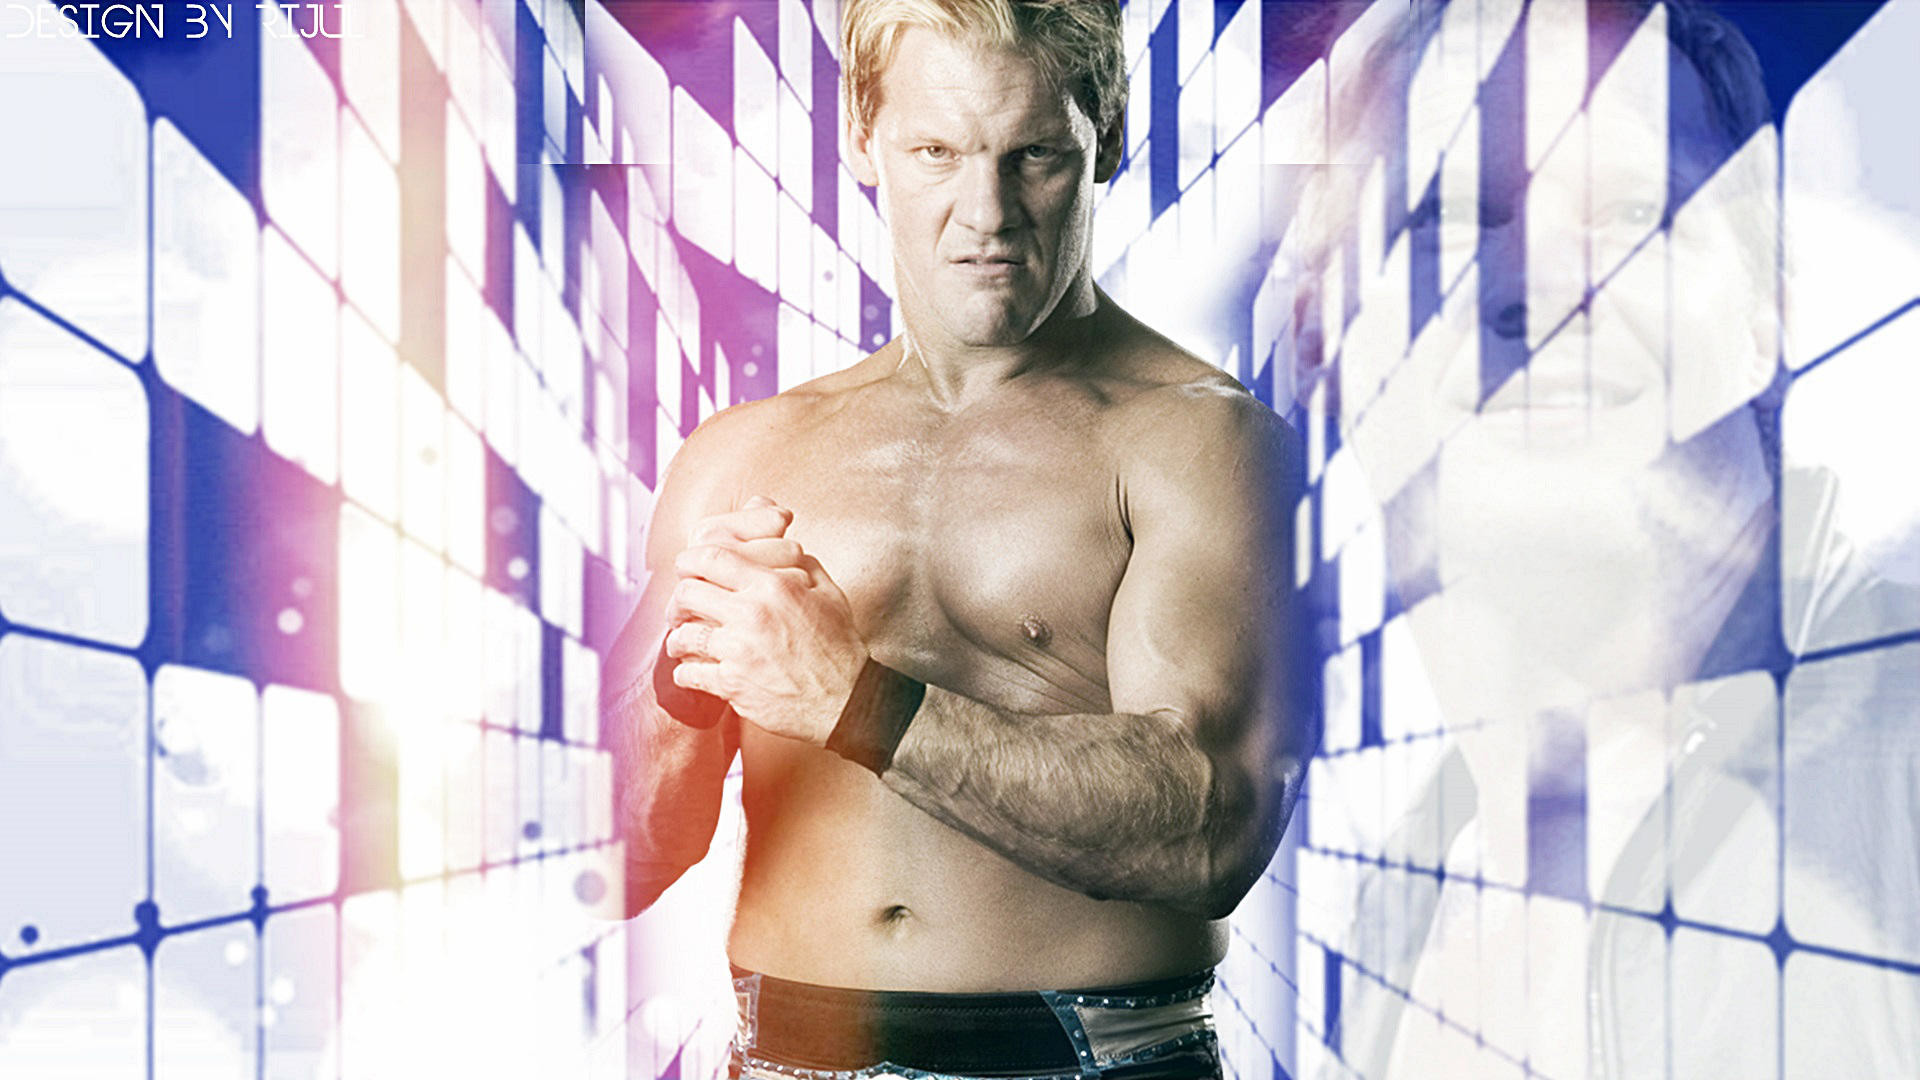 1920x1080 Chris Jericho Wallpaper by RijulWallpapers Chris Jericho Wallpaper by  RijulWallpapers